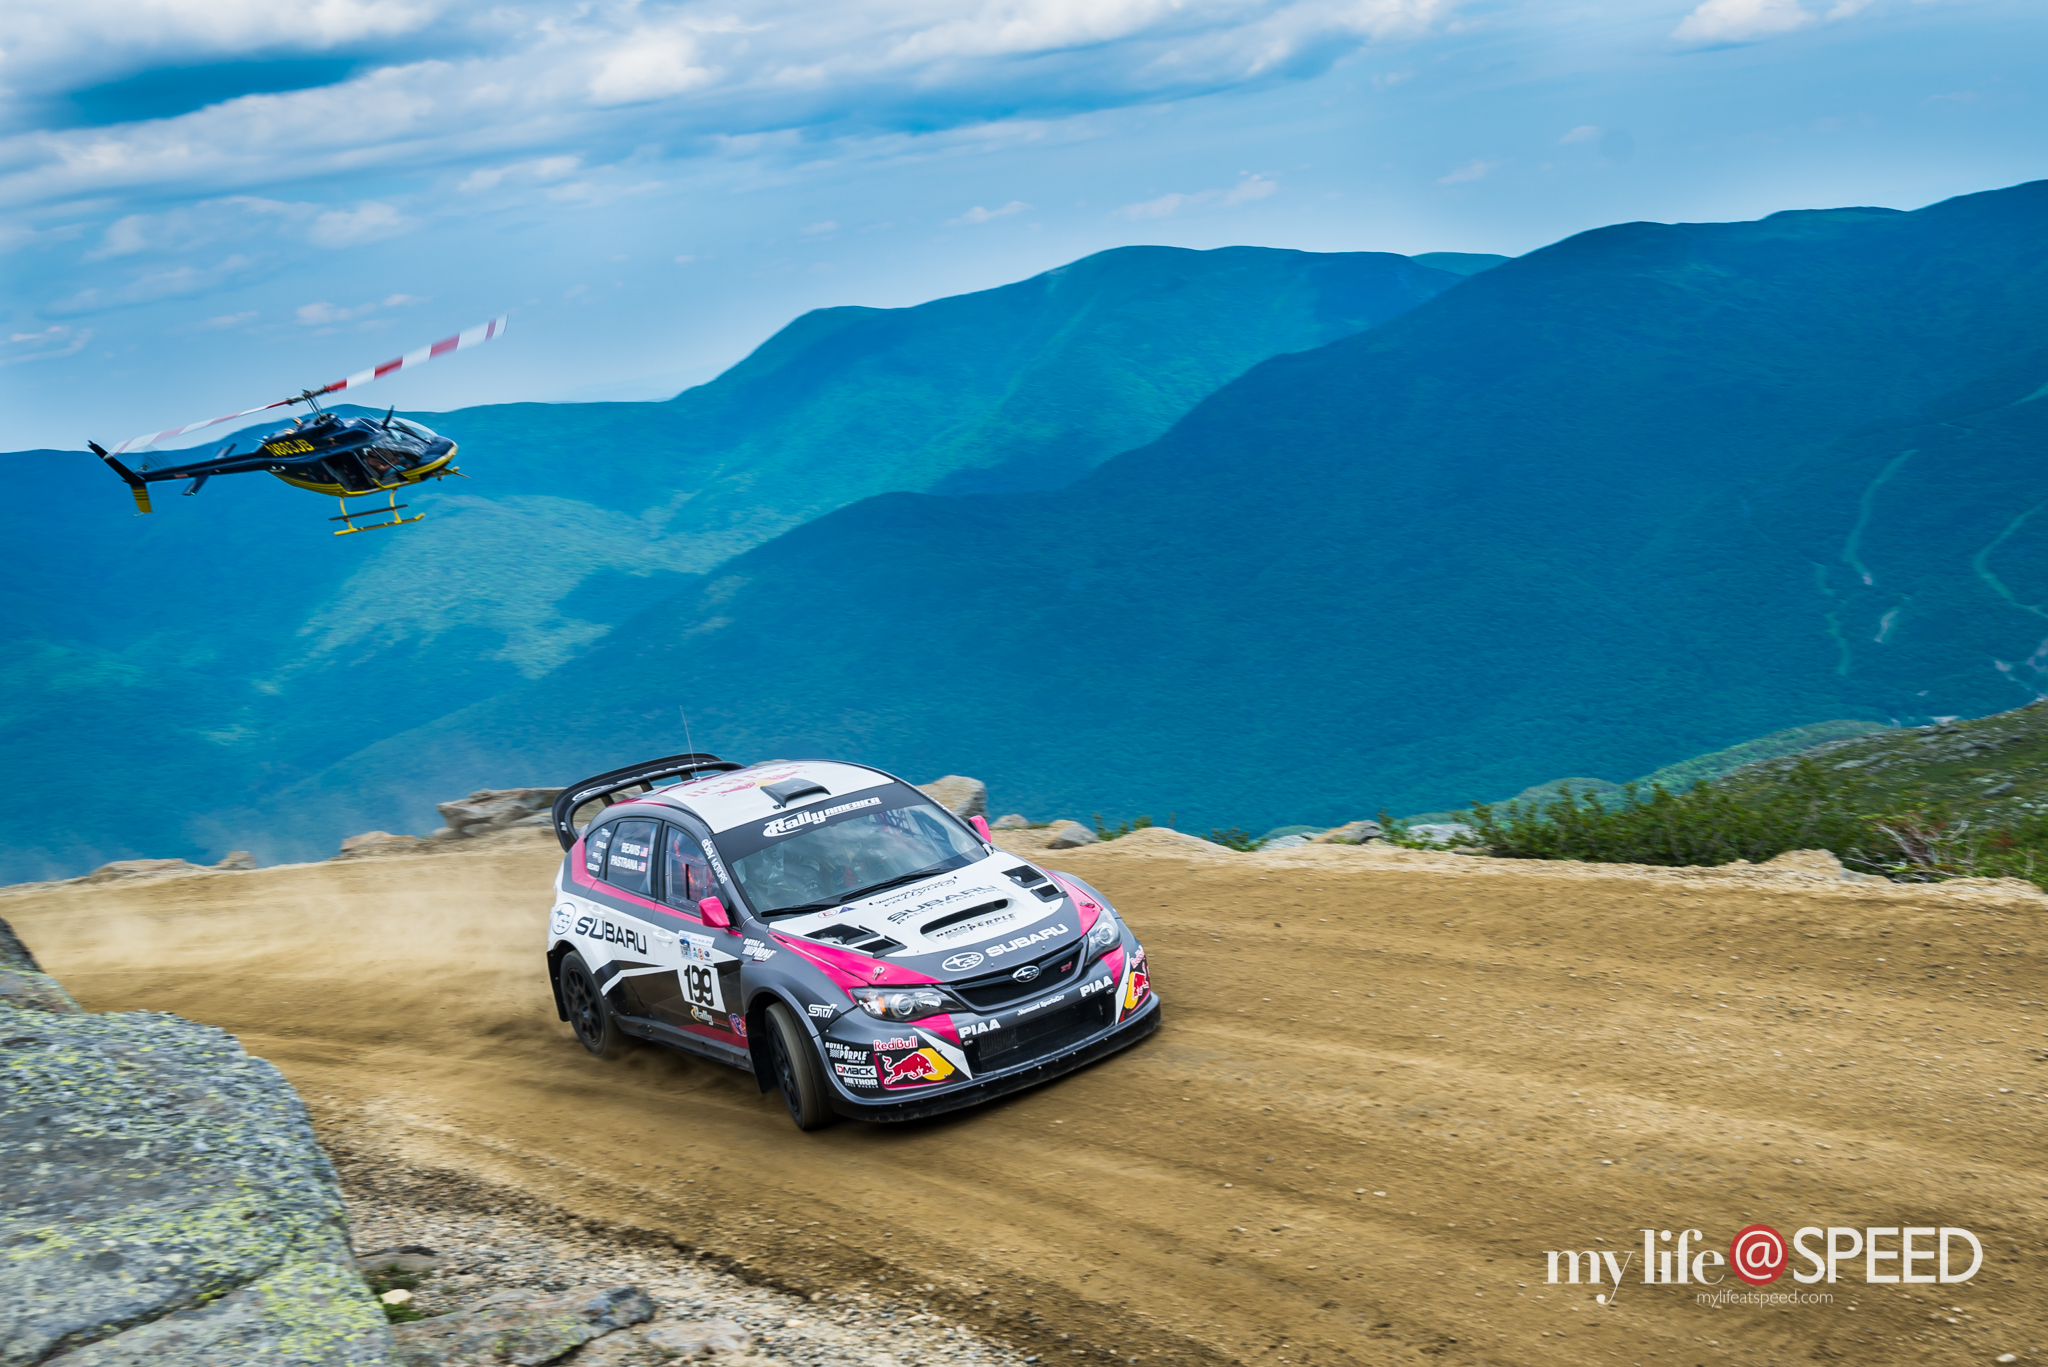 Pastrana being chased by the helicopter. 